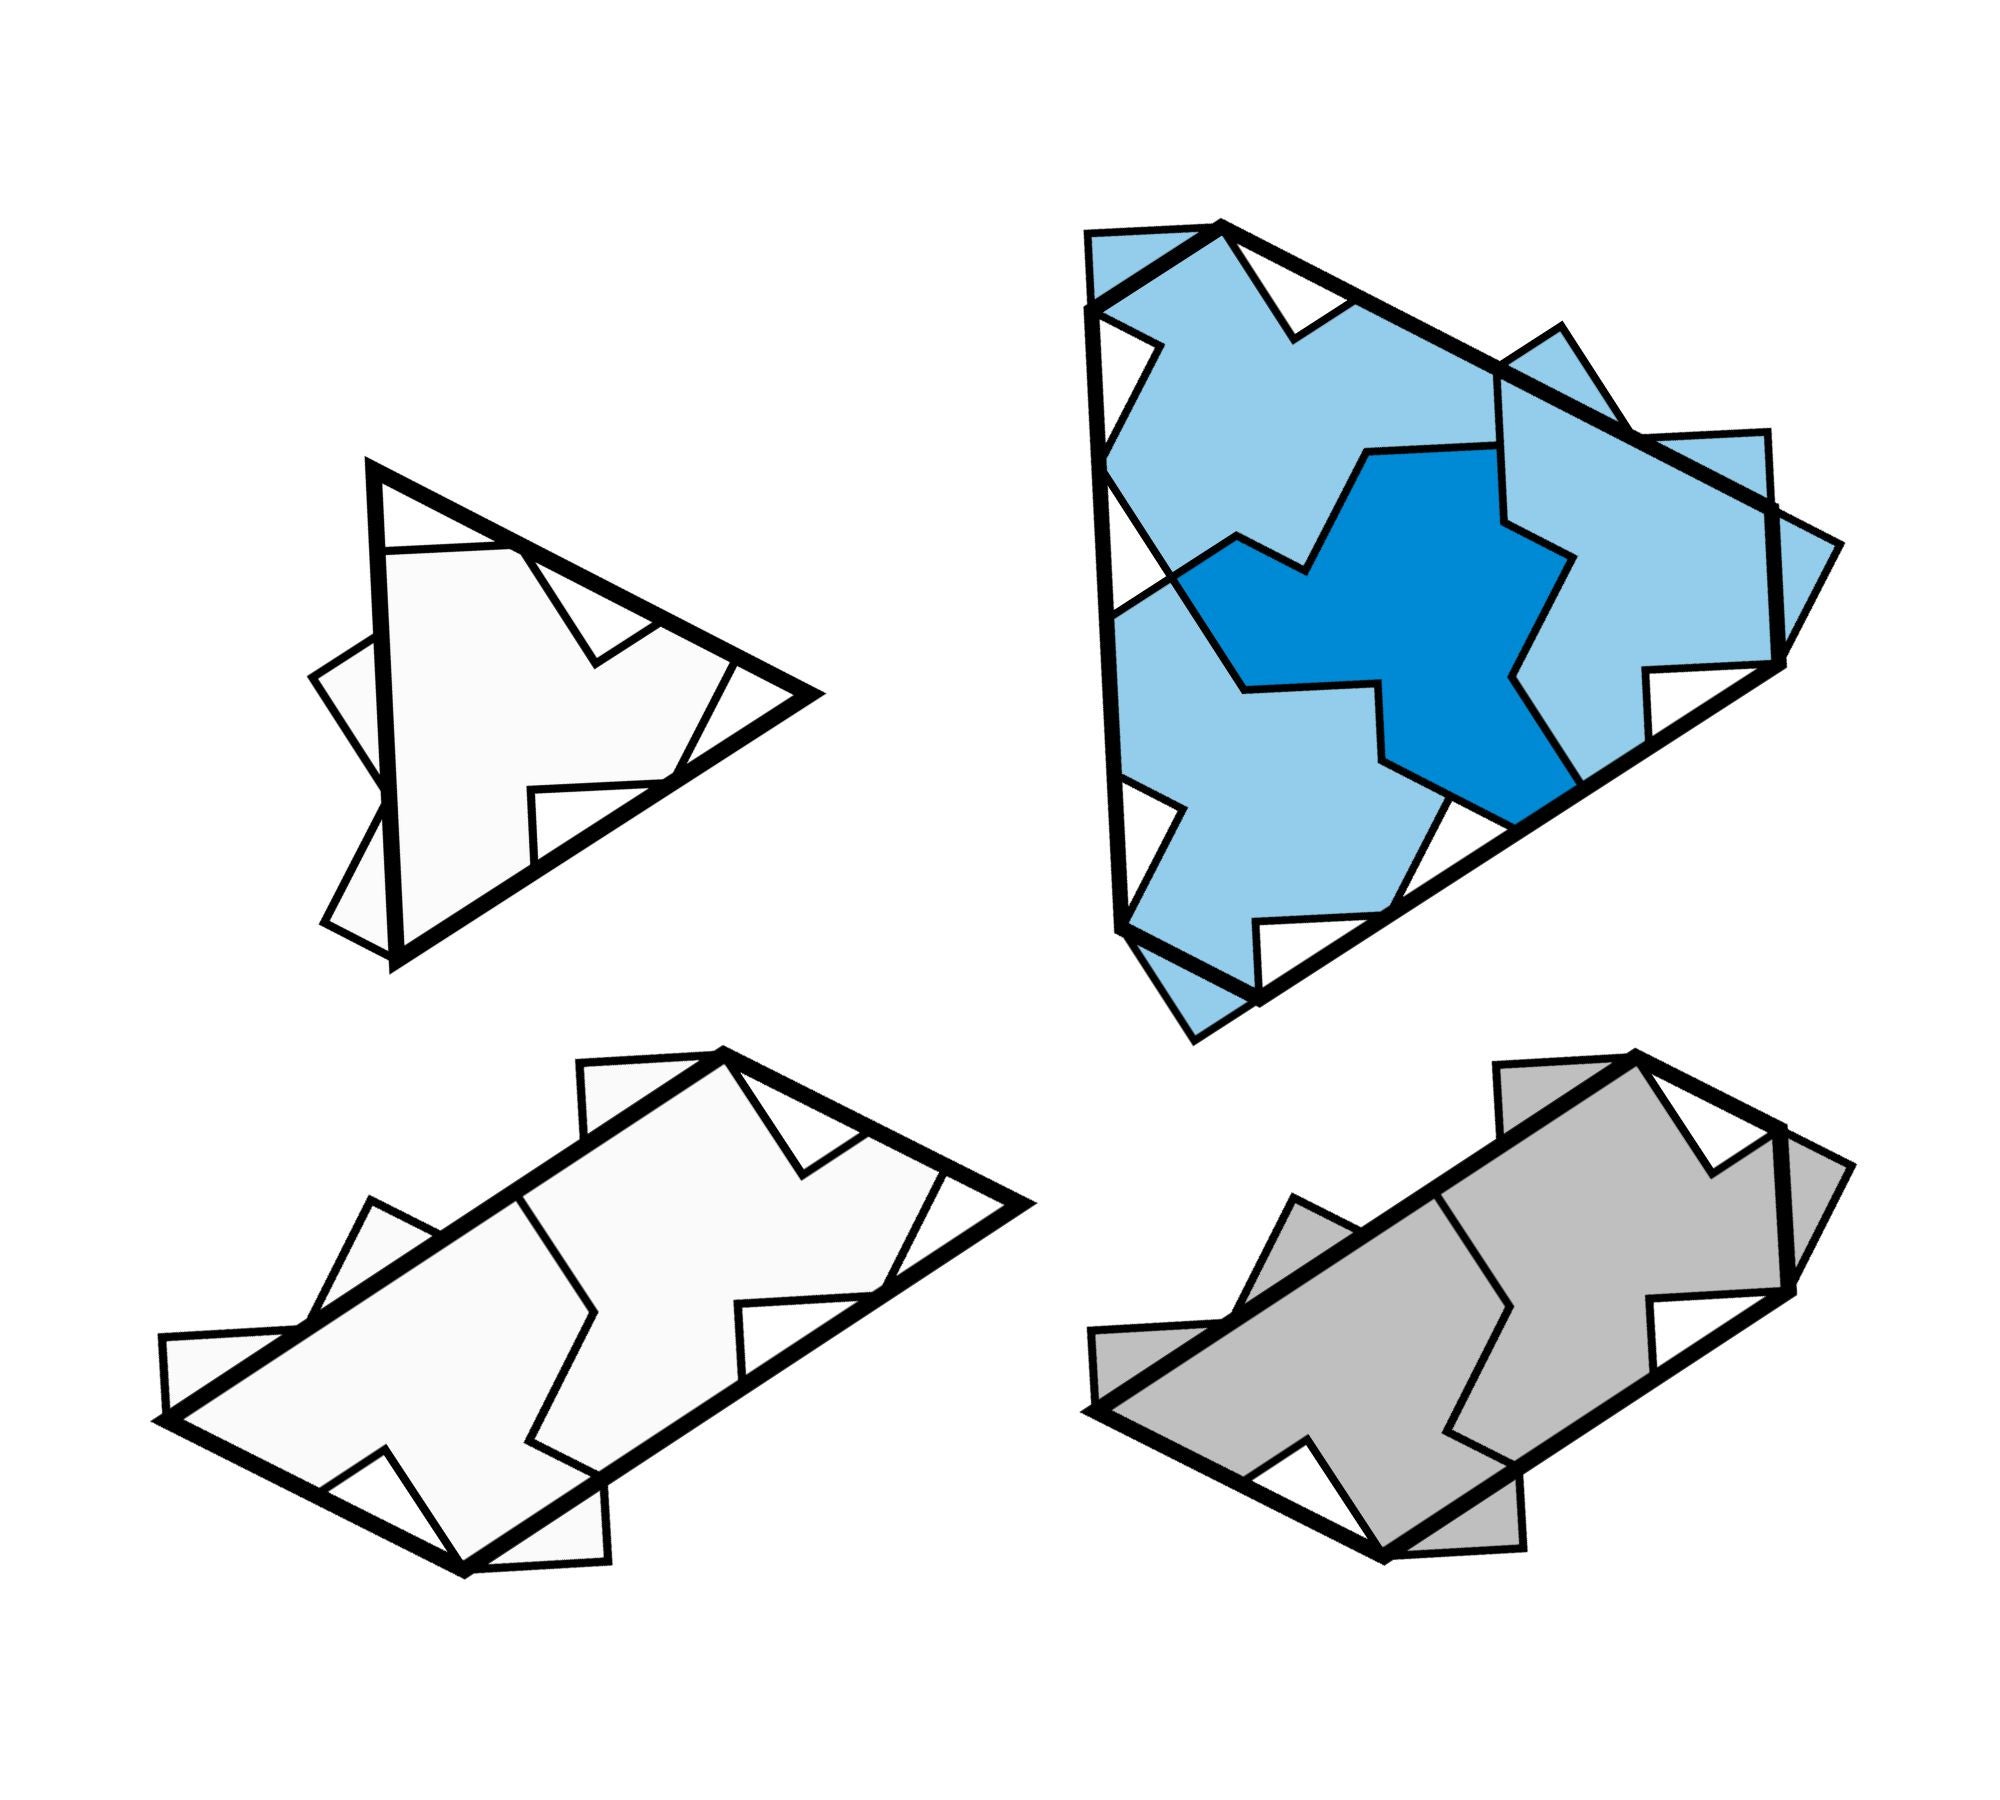 Four different shapes of clusters of the hat tile.